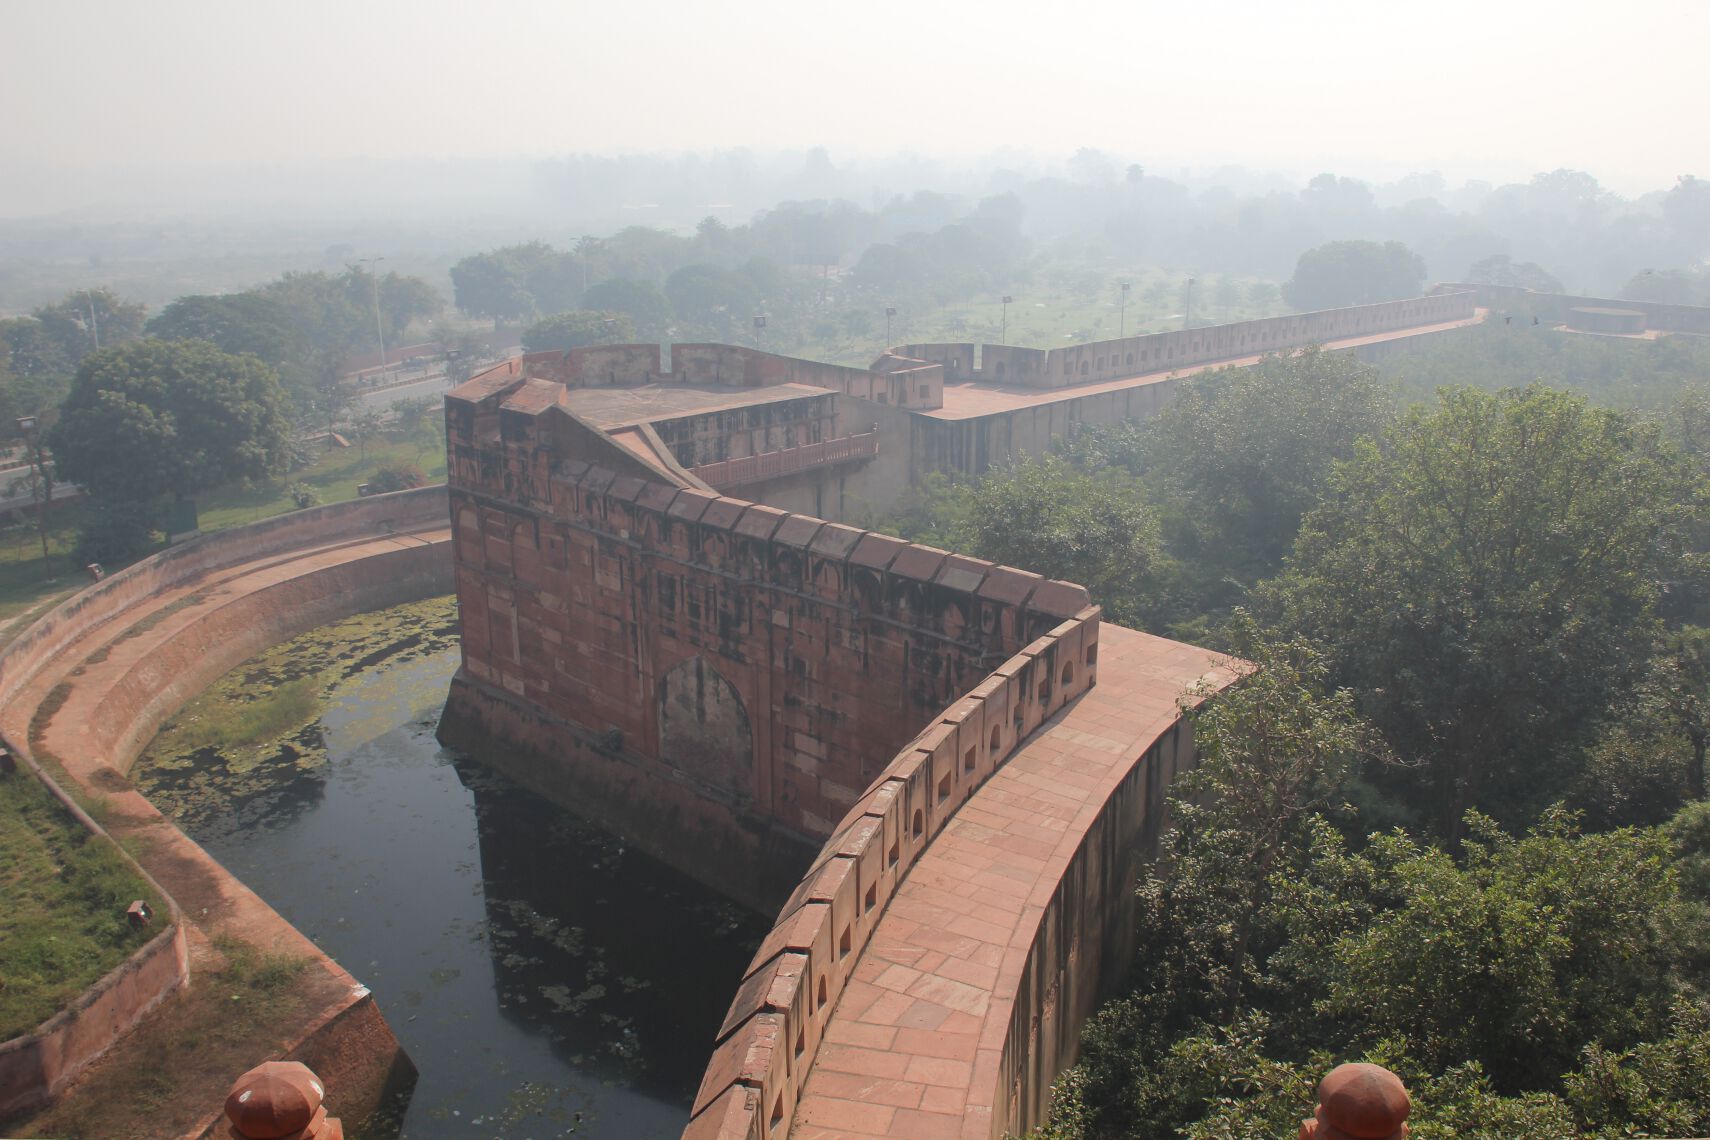 Agra Fort is one of the best-preserved red-sandstone Mughal forts in India.